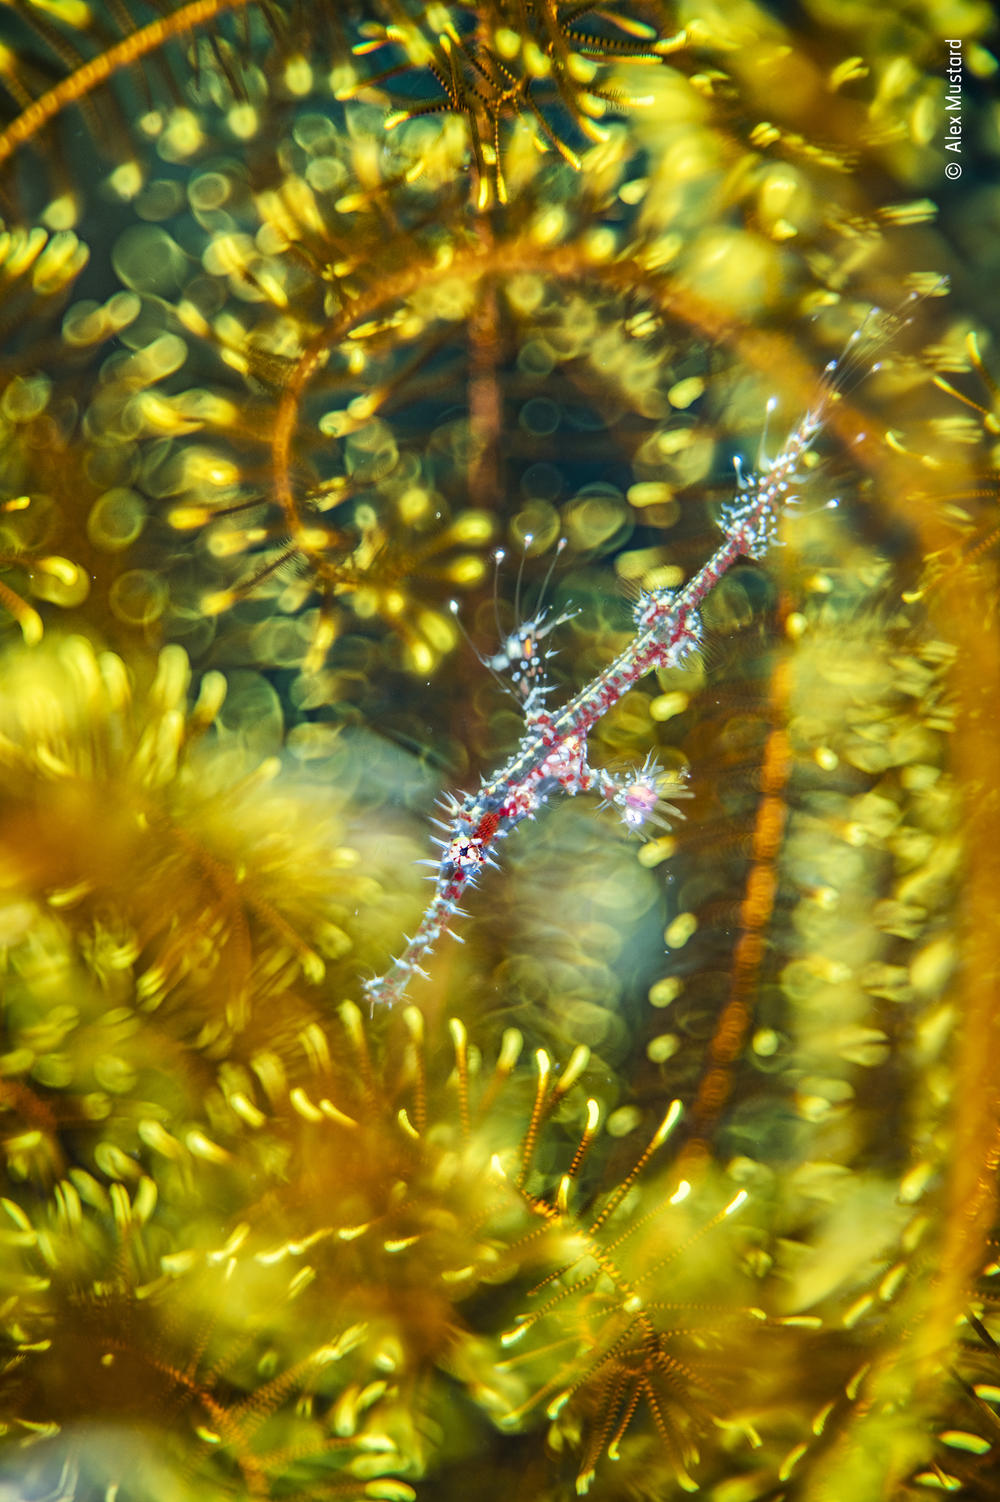 <em>Bedazzled</em>, by Alex Mustard, U.K., winner, category: natural artistry. Mustard found a ghost pipefish hiding among the arms of a feather star. Mustard had always wanted to capture such an image of a juvenile ghost pipefish but usually found only darker adults on matching feather stars.